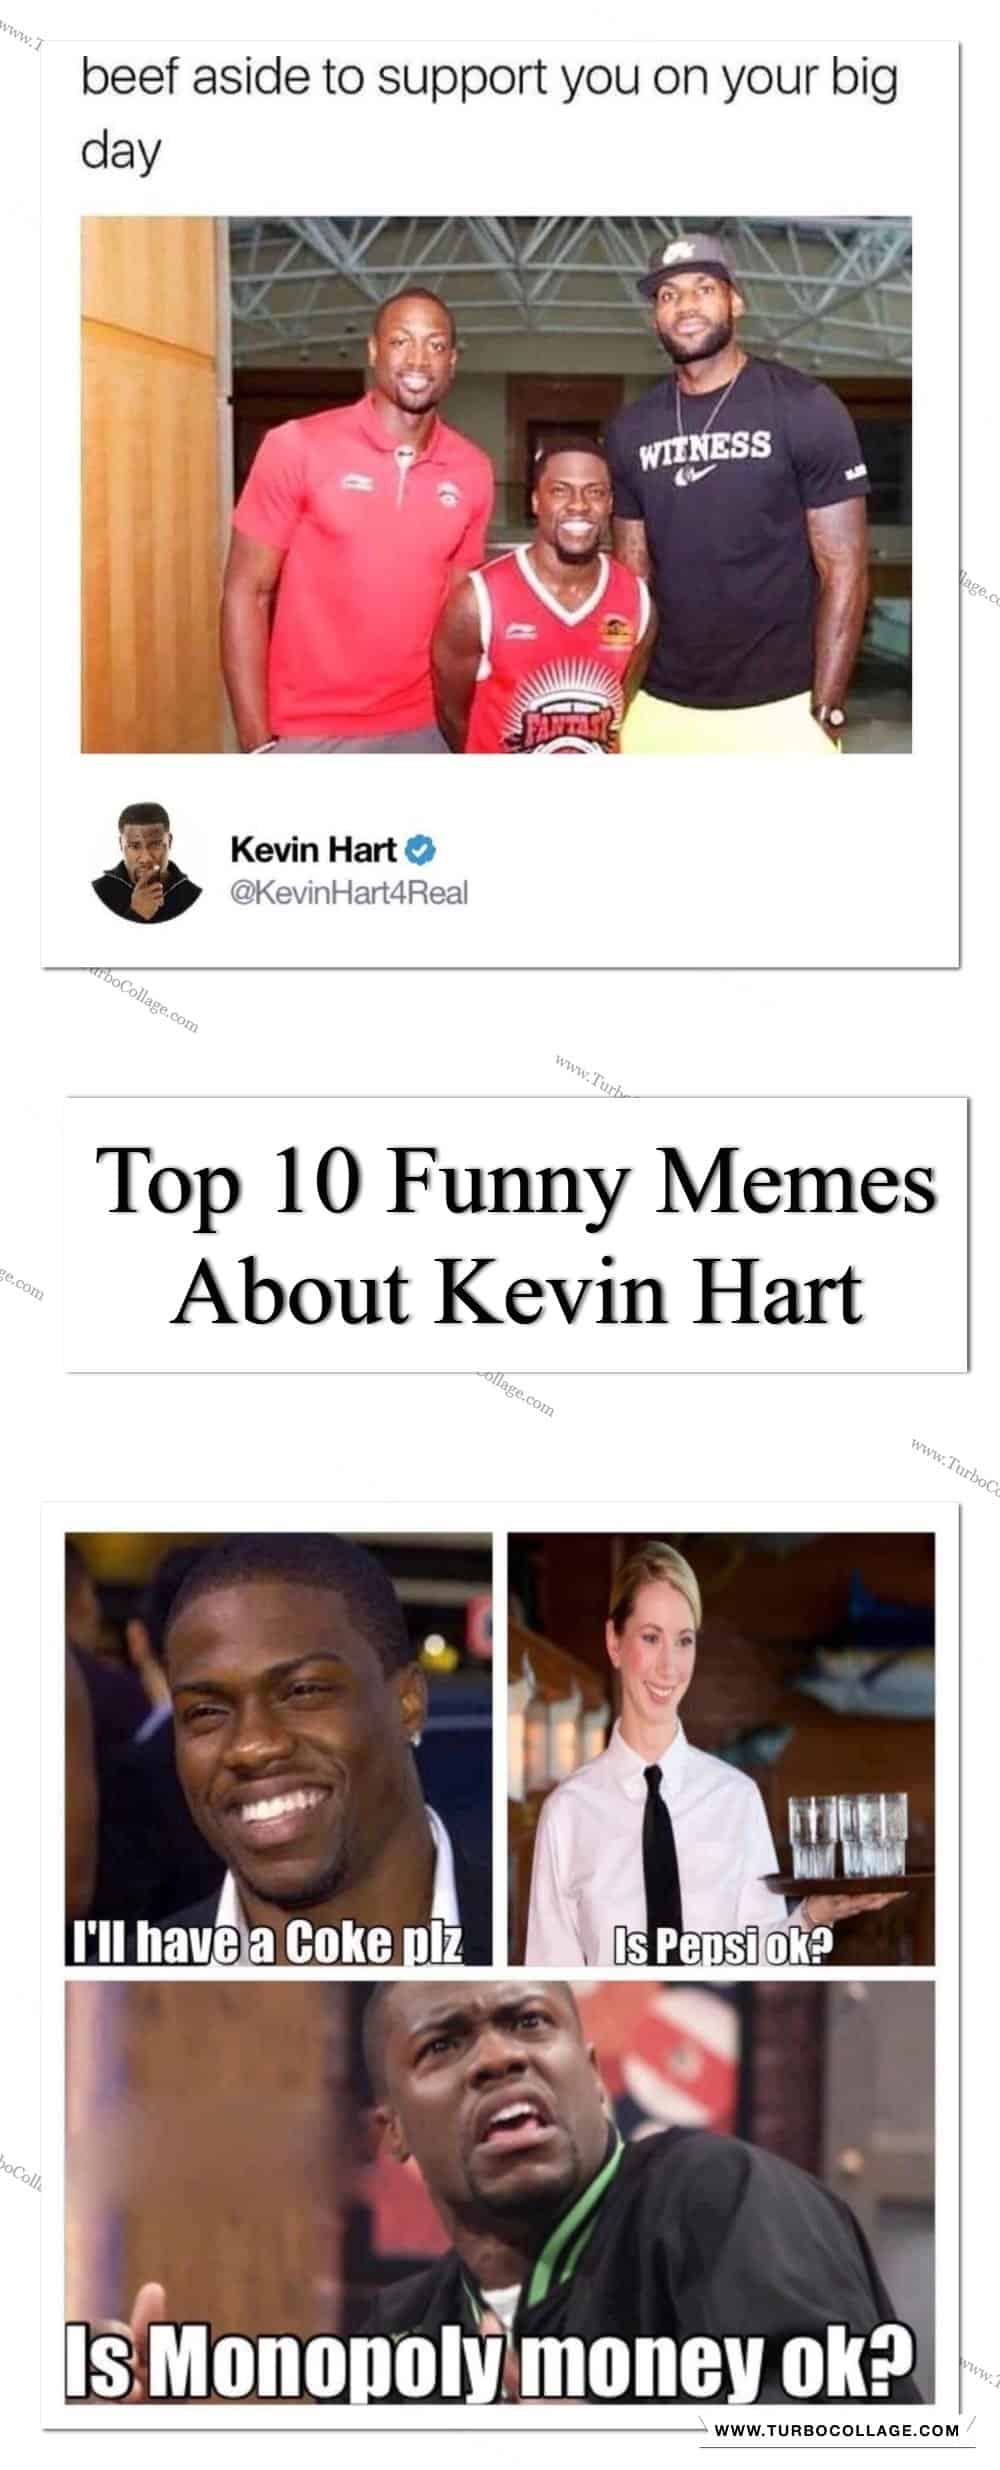 Top 10 Funny memes About Kevin Hart.